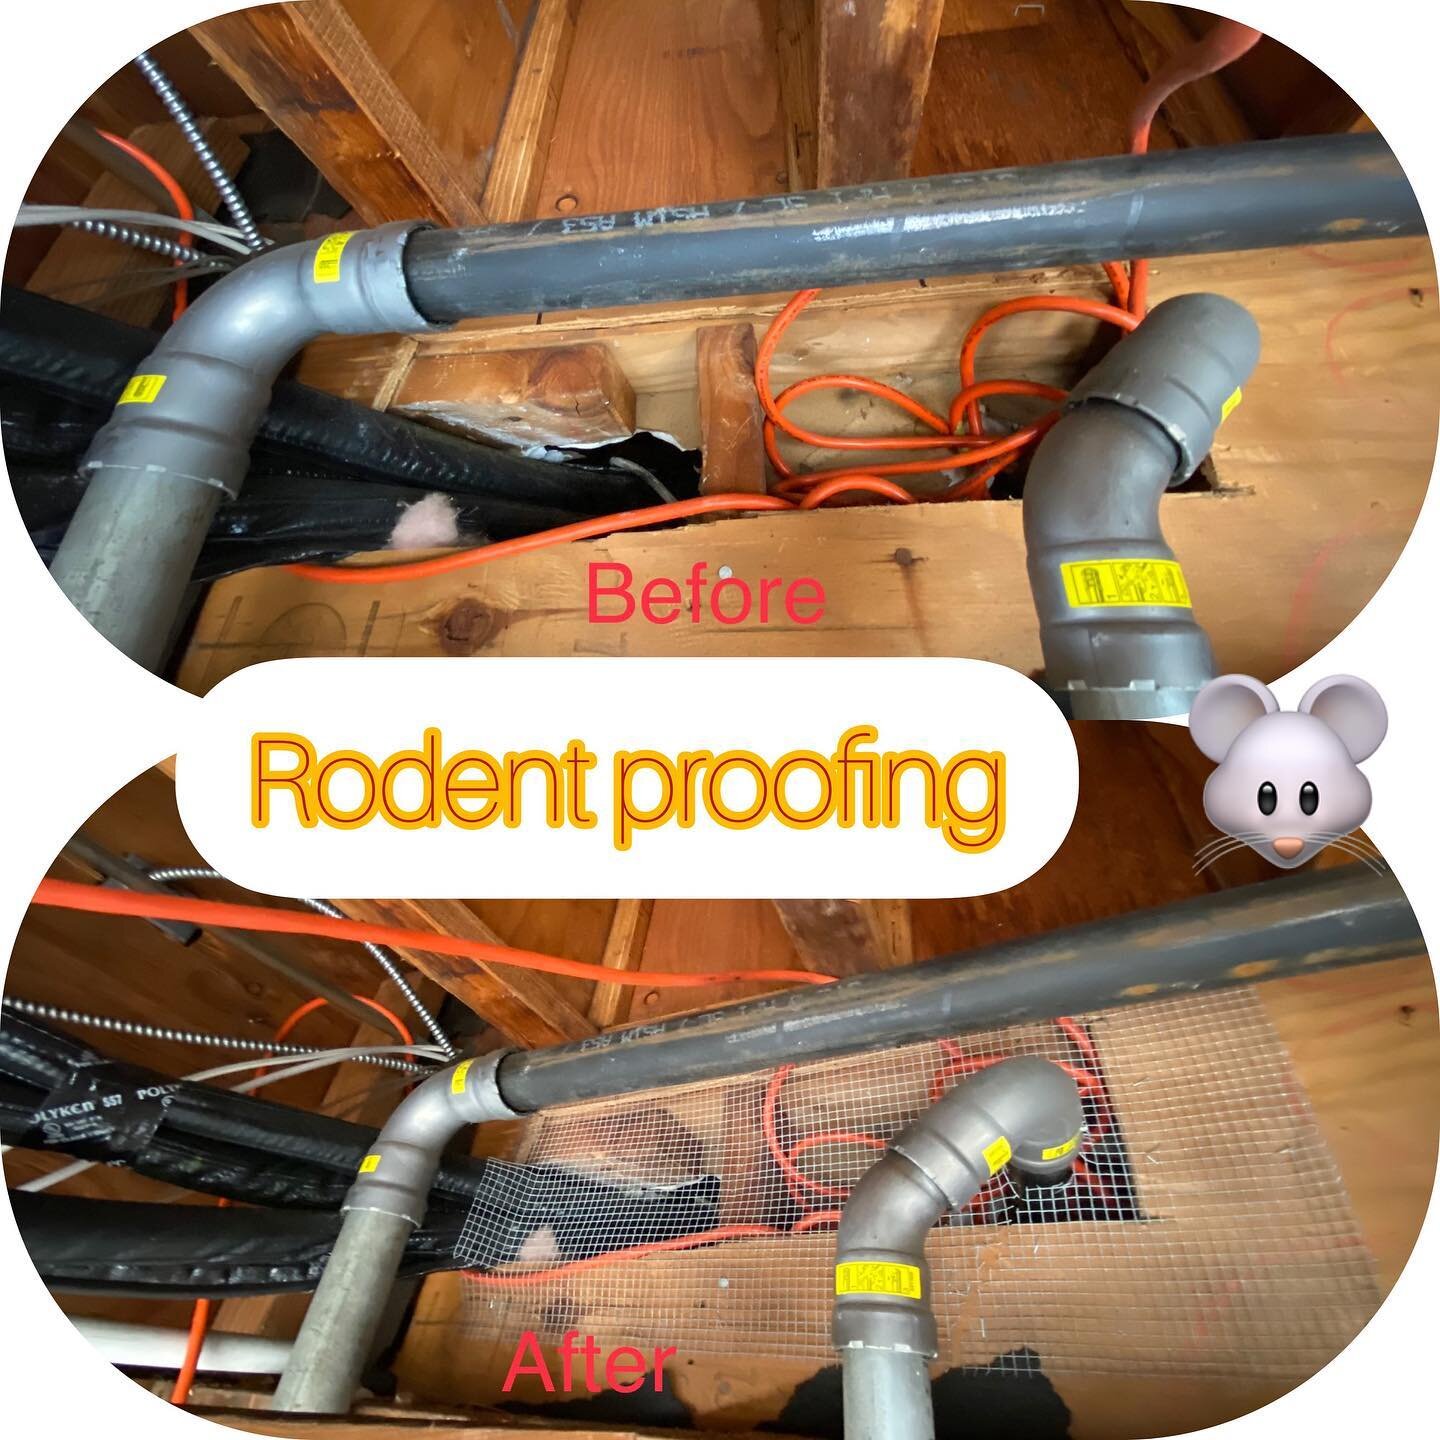 Closing rodent entrance space by Y&rsquo;s Pest Control. #rat #pestcontrol #mice #proofing